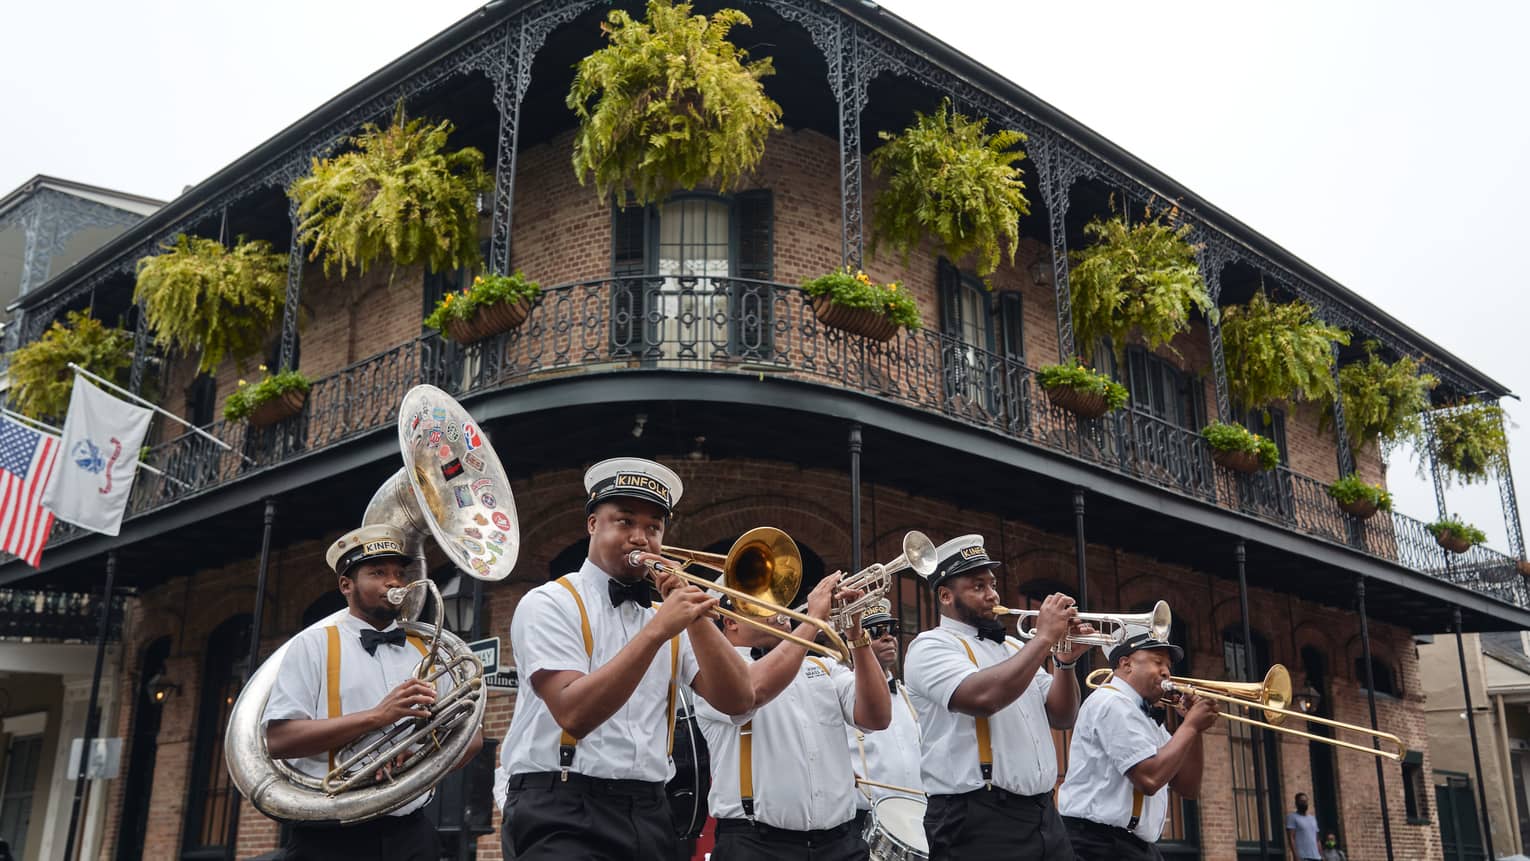 Six-piece brass band plays at the corner of a two-storey building beneath a balcony adorned with flags, ferns and flowers